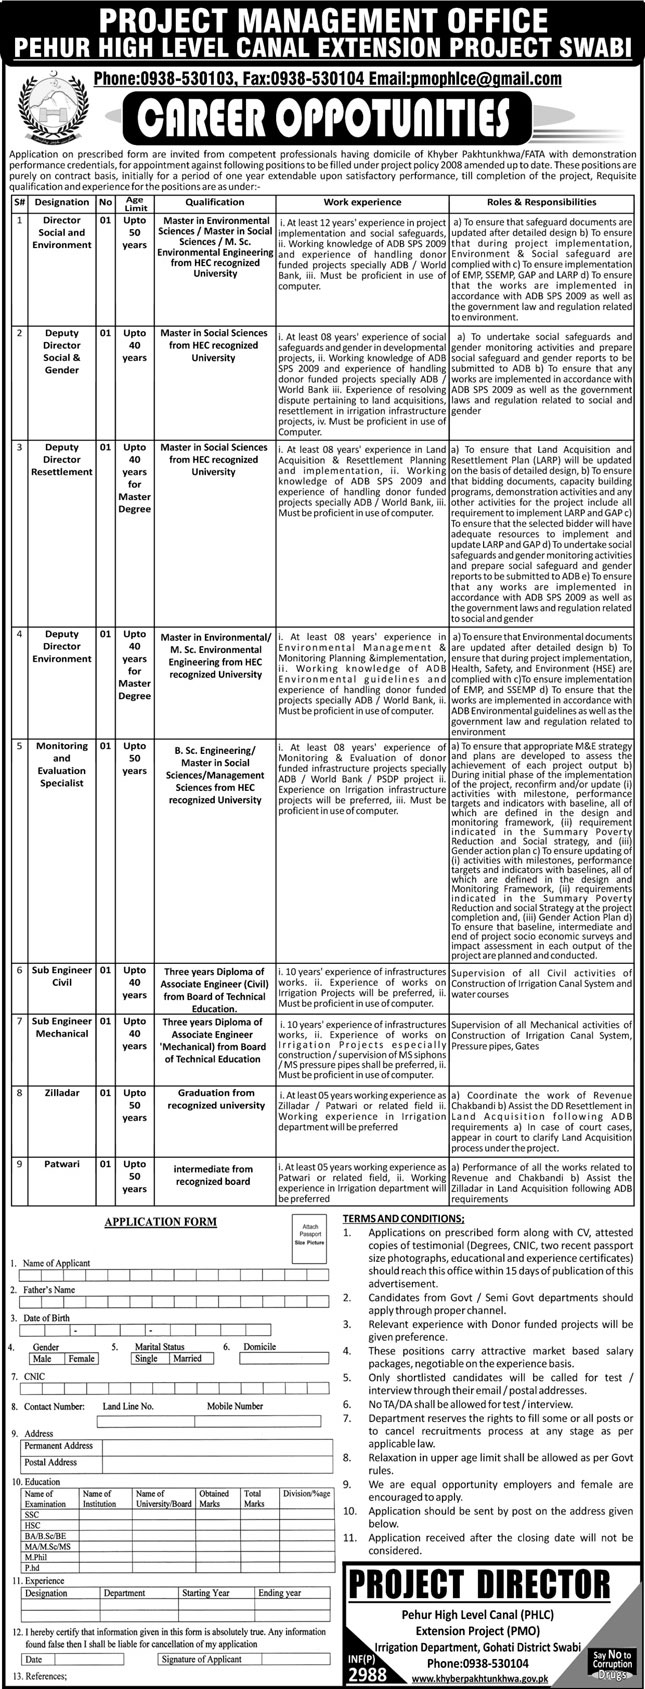 Jobs in Pehur High Level Canal Extension Project Swabi 11 July 2018